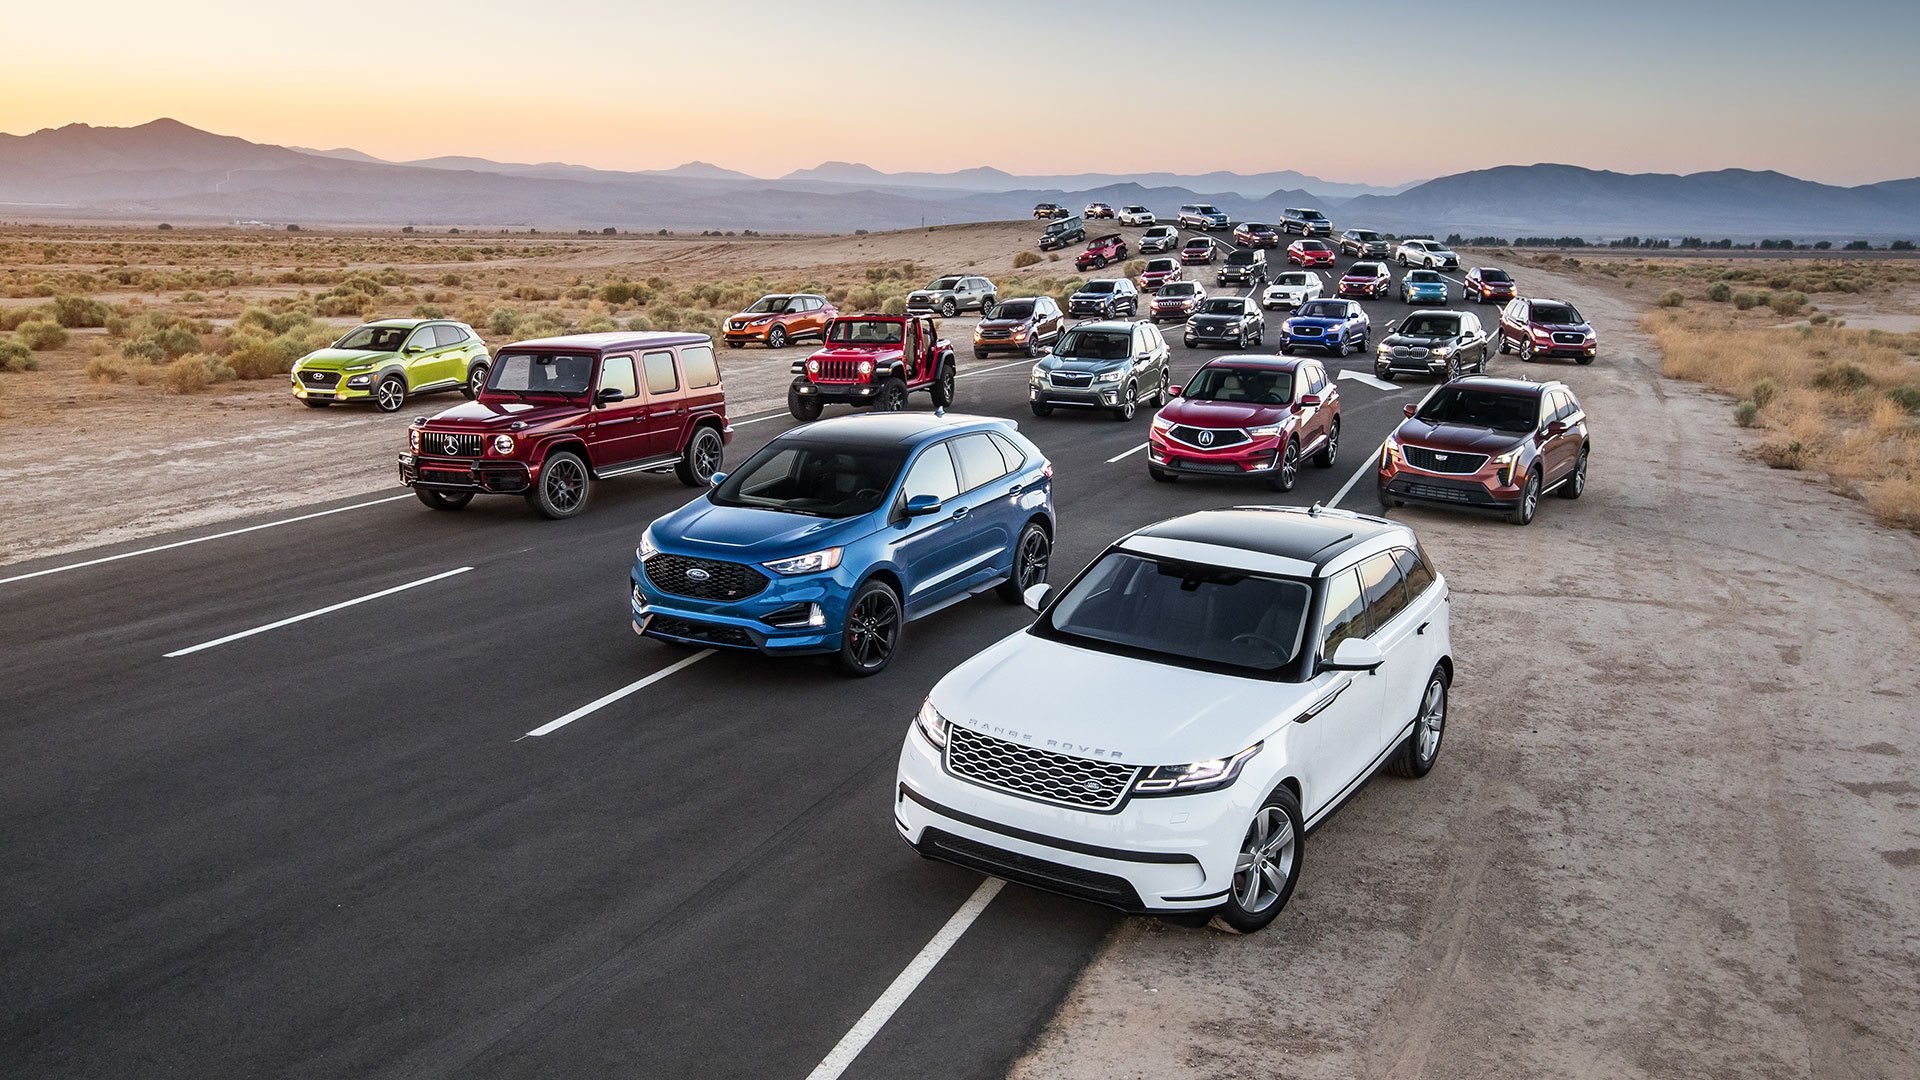 Of The Year 1, Episode 2 MotorTrend’s 2019 SUV of the Year The